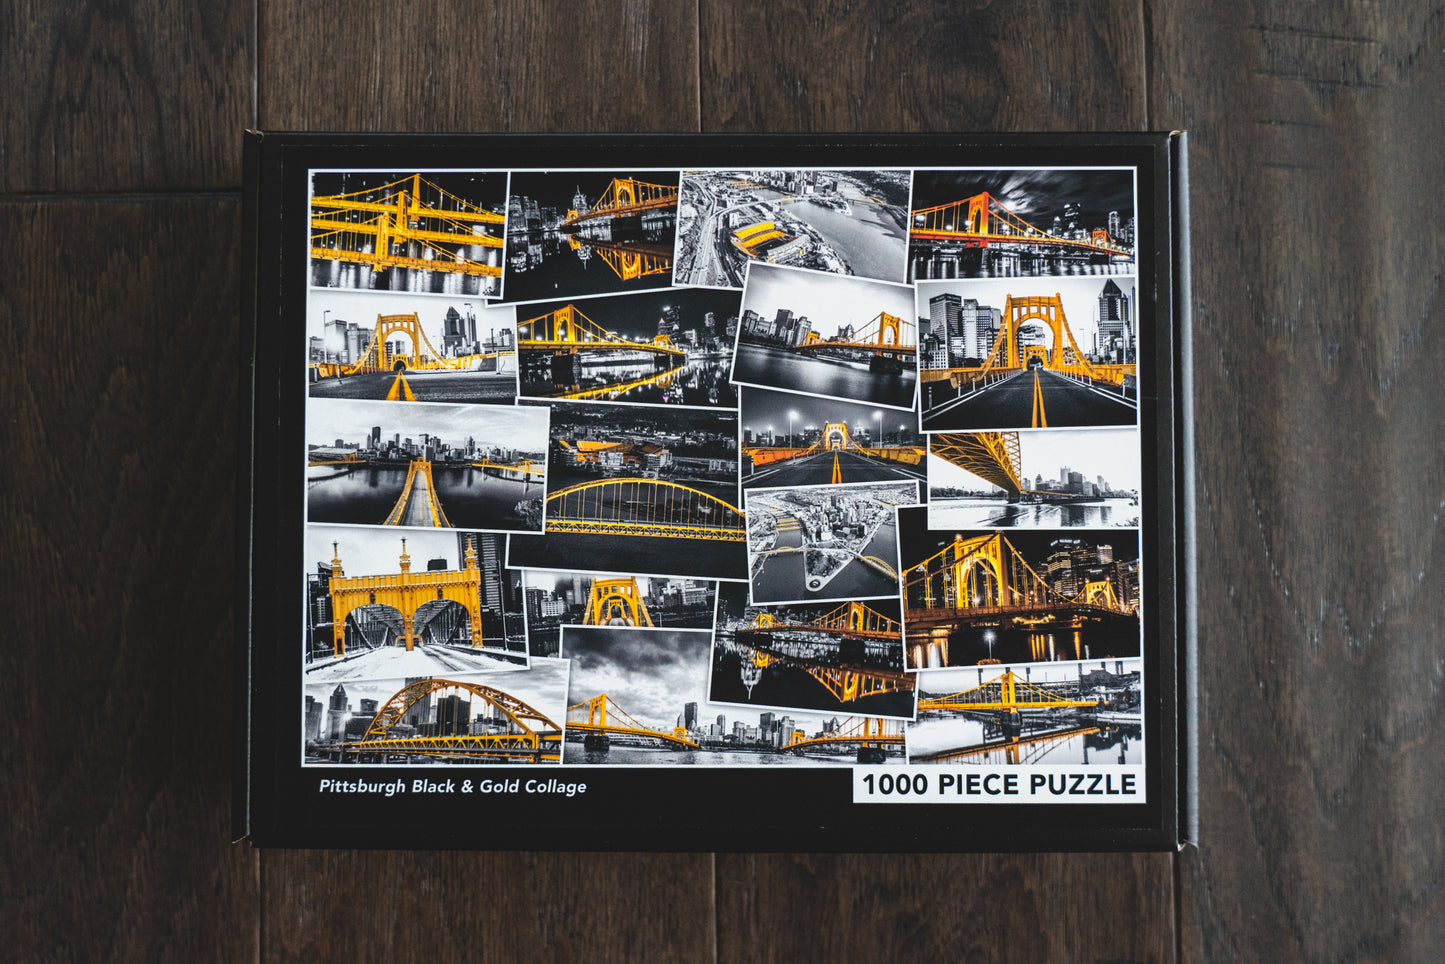 Pittsburgh Black & Gold Collage Jigsaw Puzzle - 1000 Pieces